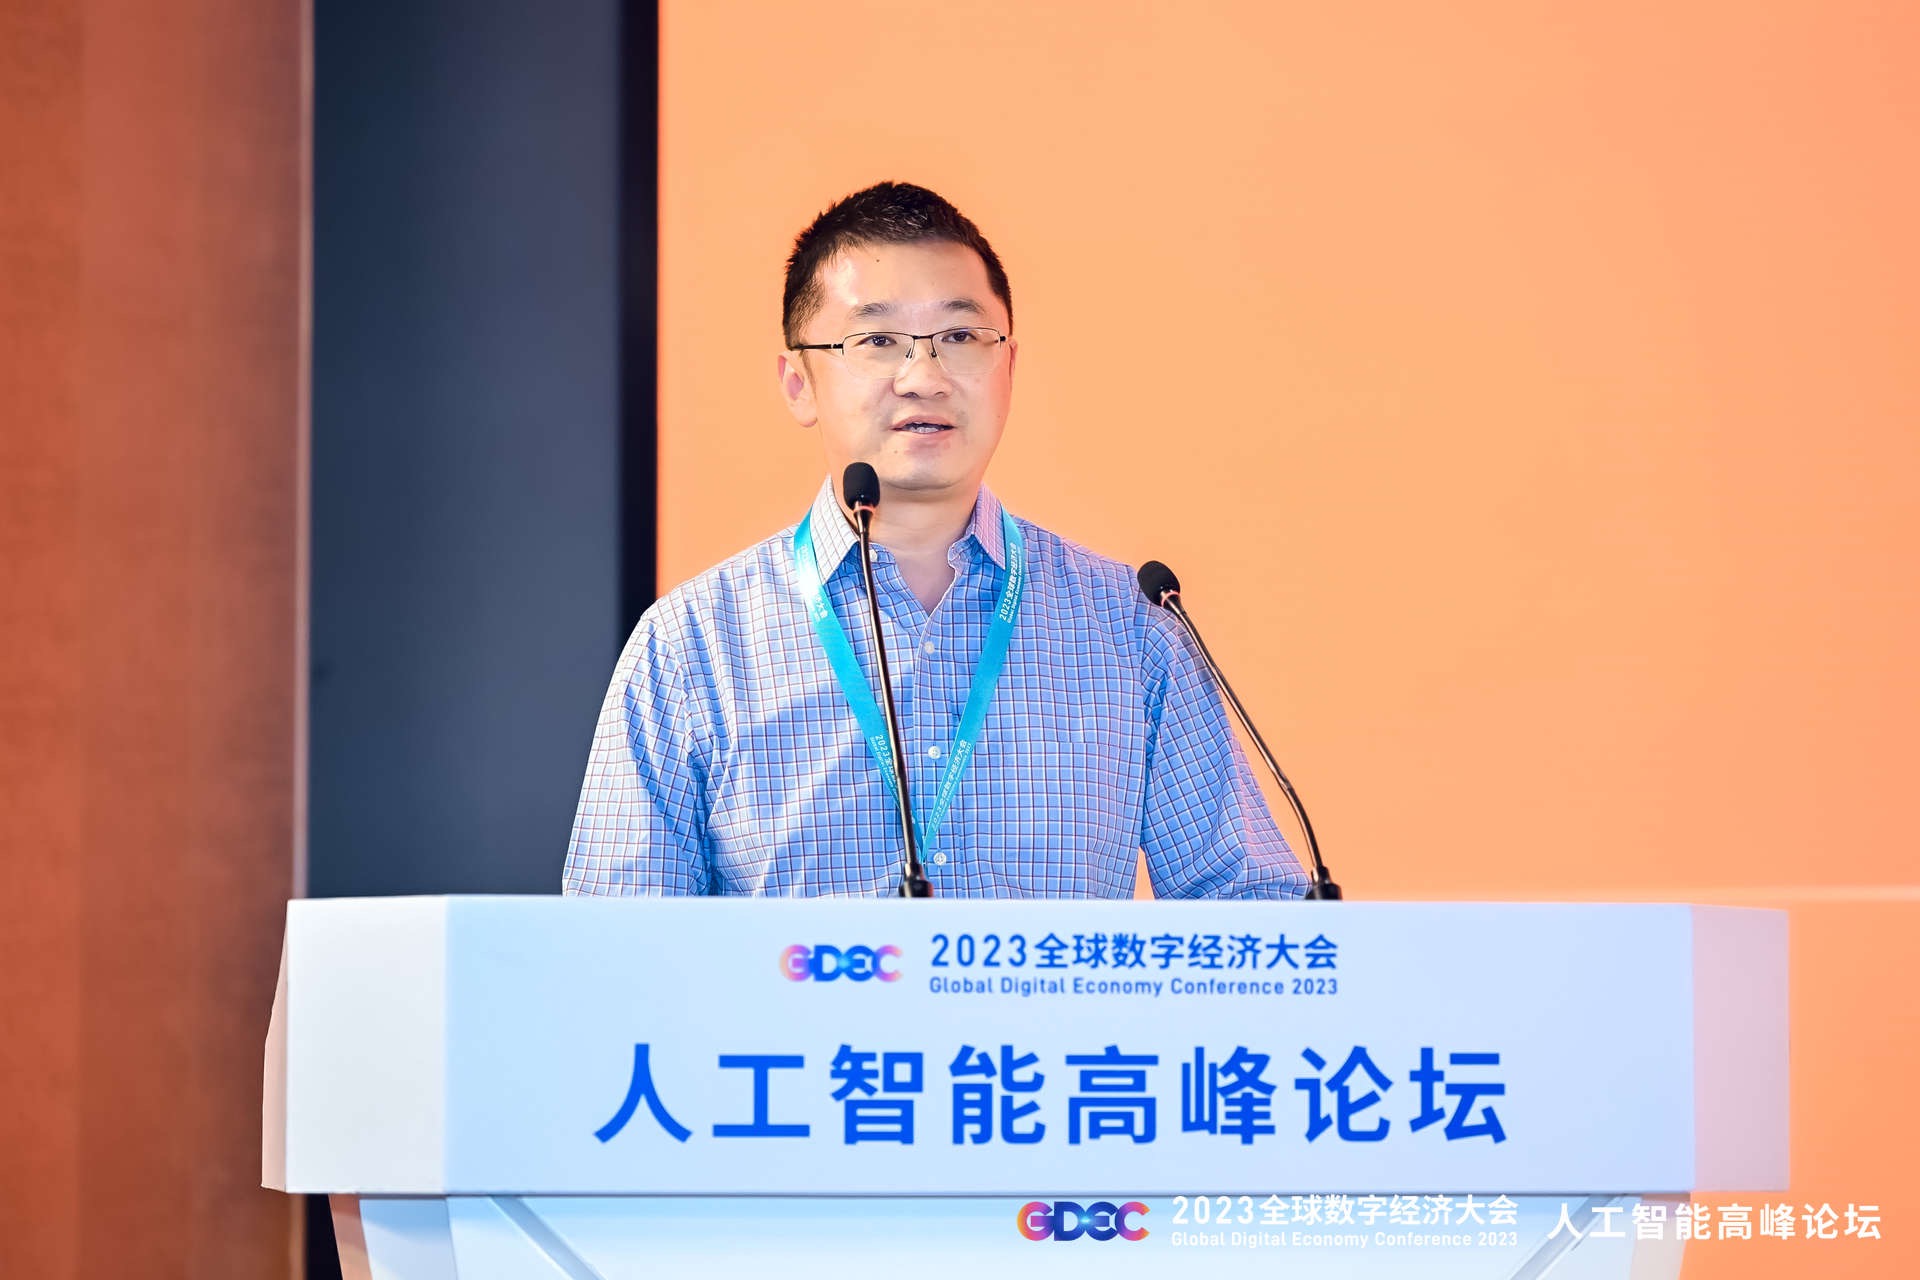 AI experts and corporate CEOs share their latest insights and progress at Beijing’s AI Summit attracting millions of online viewers“mile米乐m6”(图12)